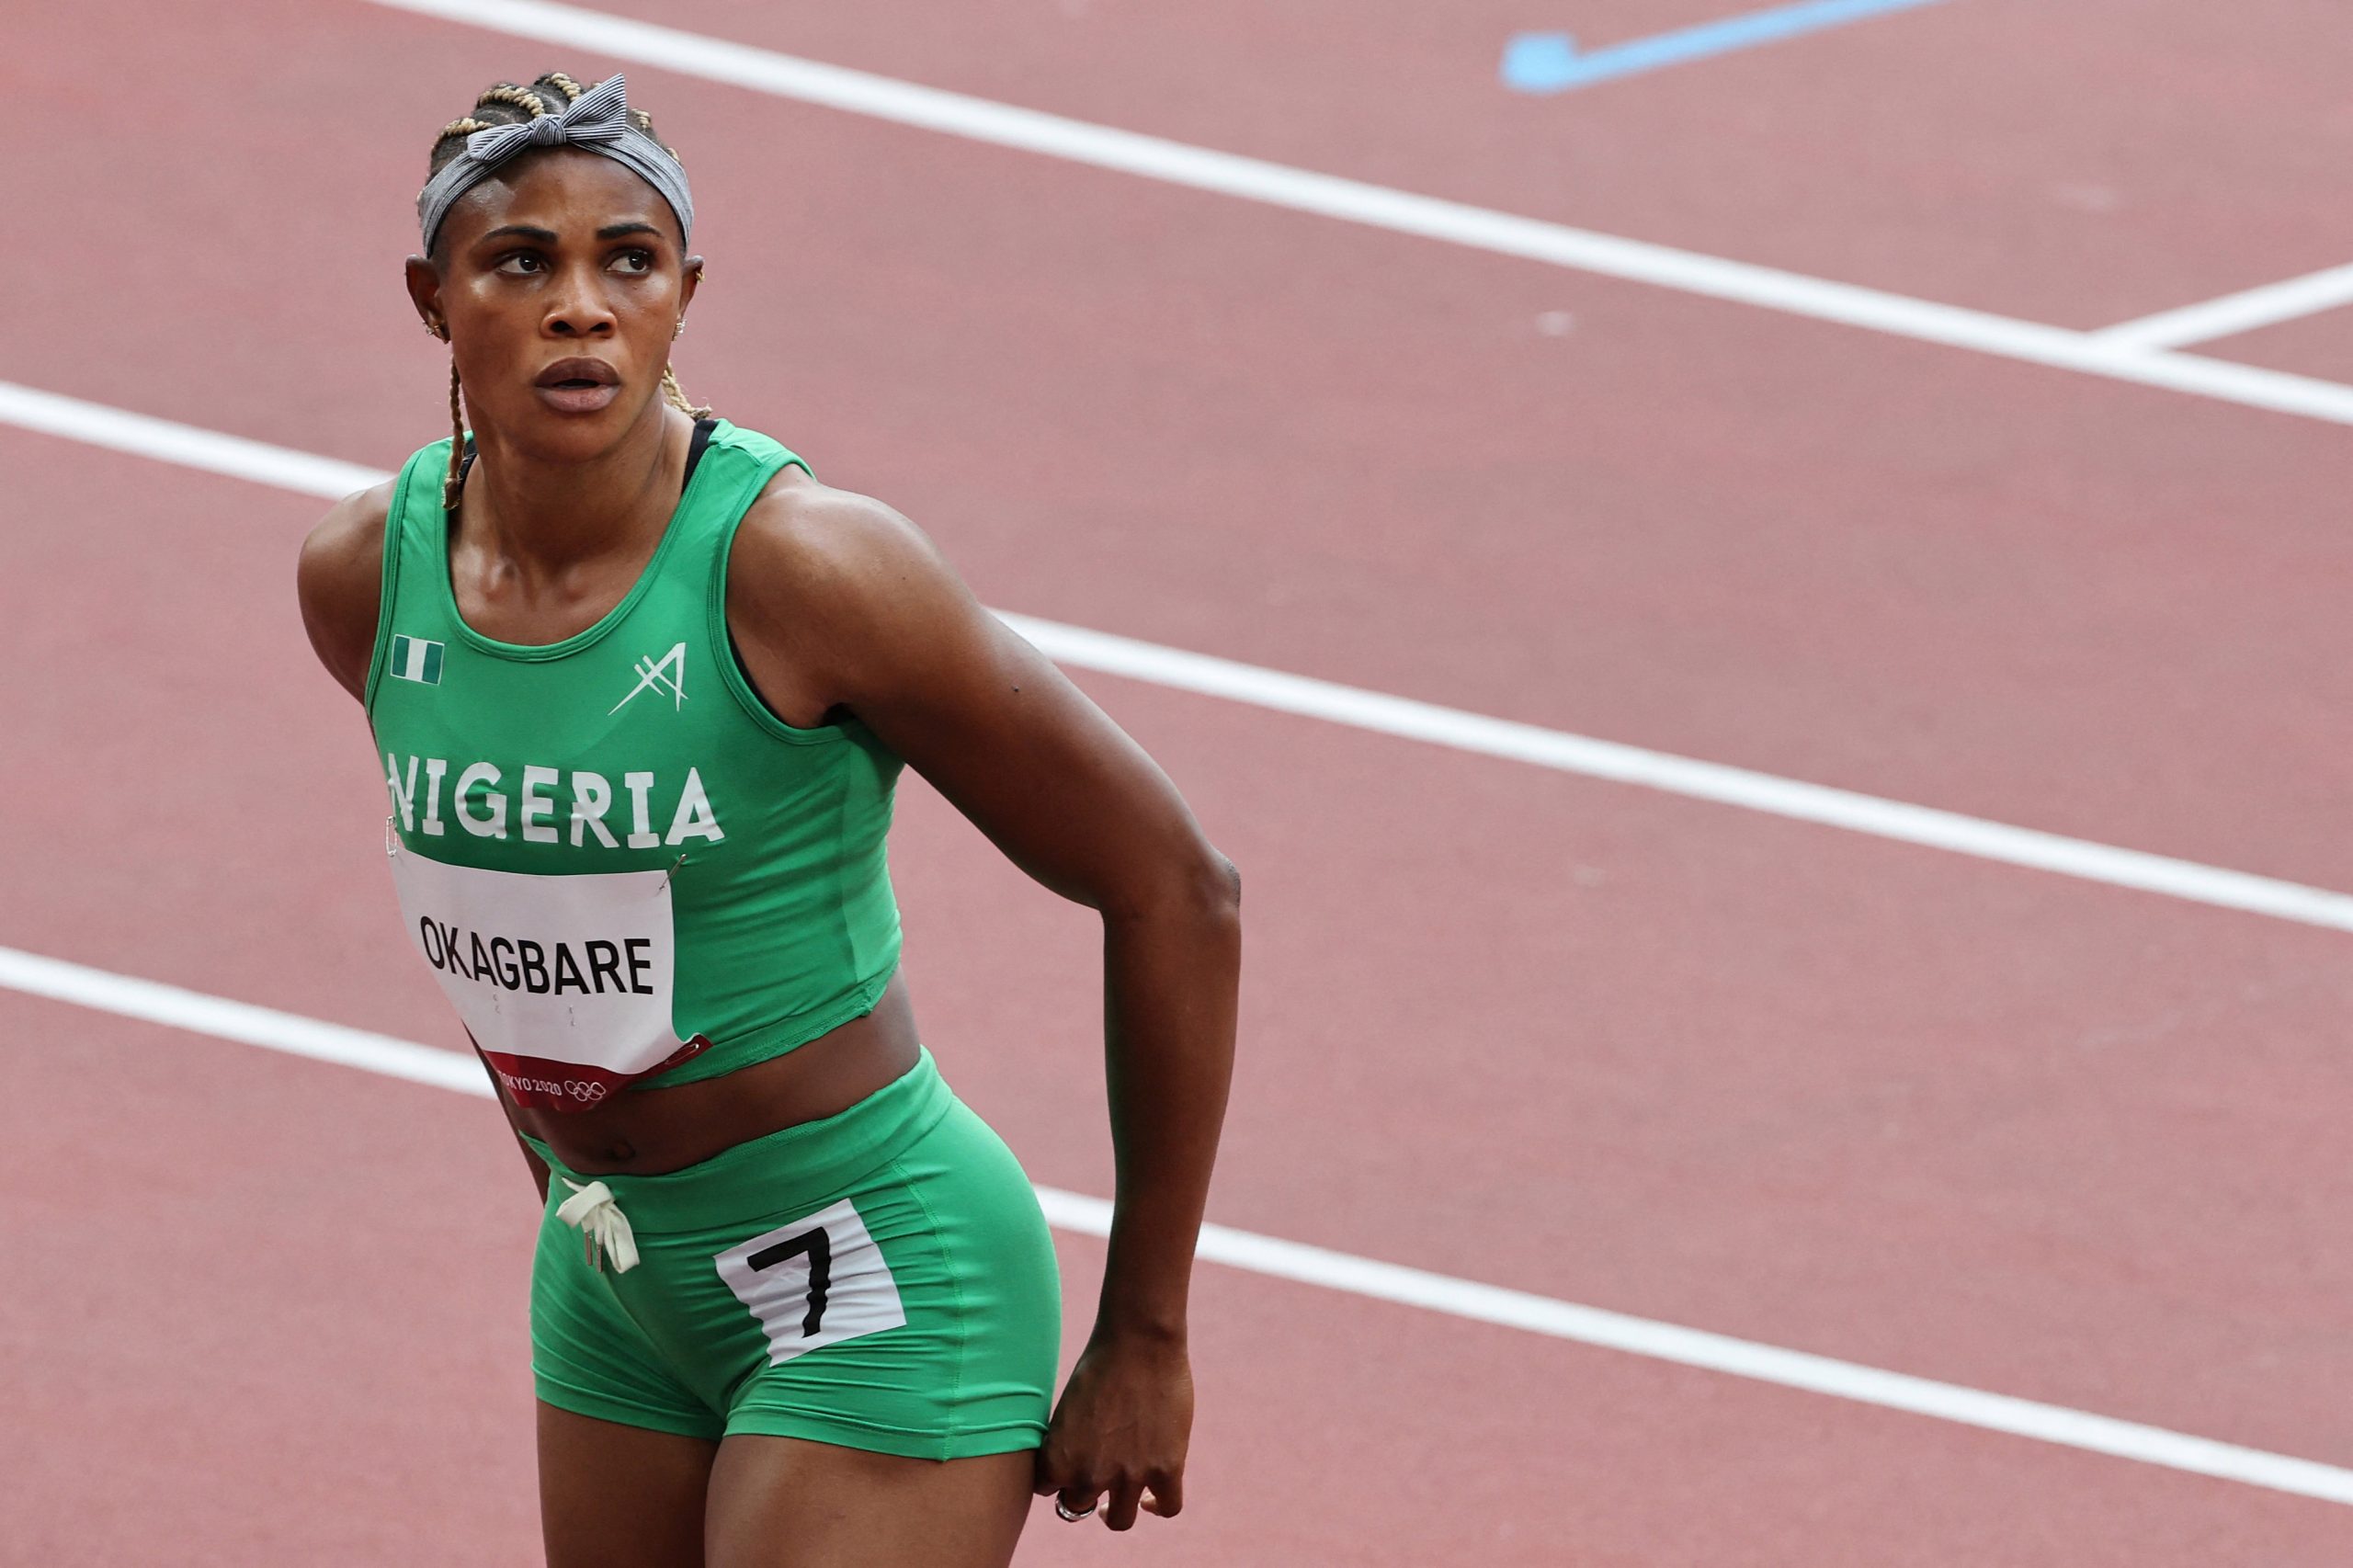 AFN Expresses Shock Over Blessing Okagbare’s Doping Rule Violation